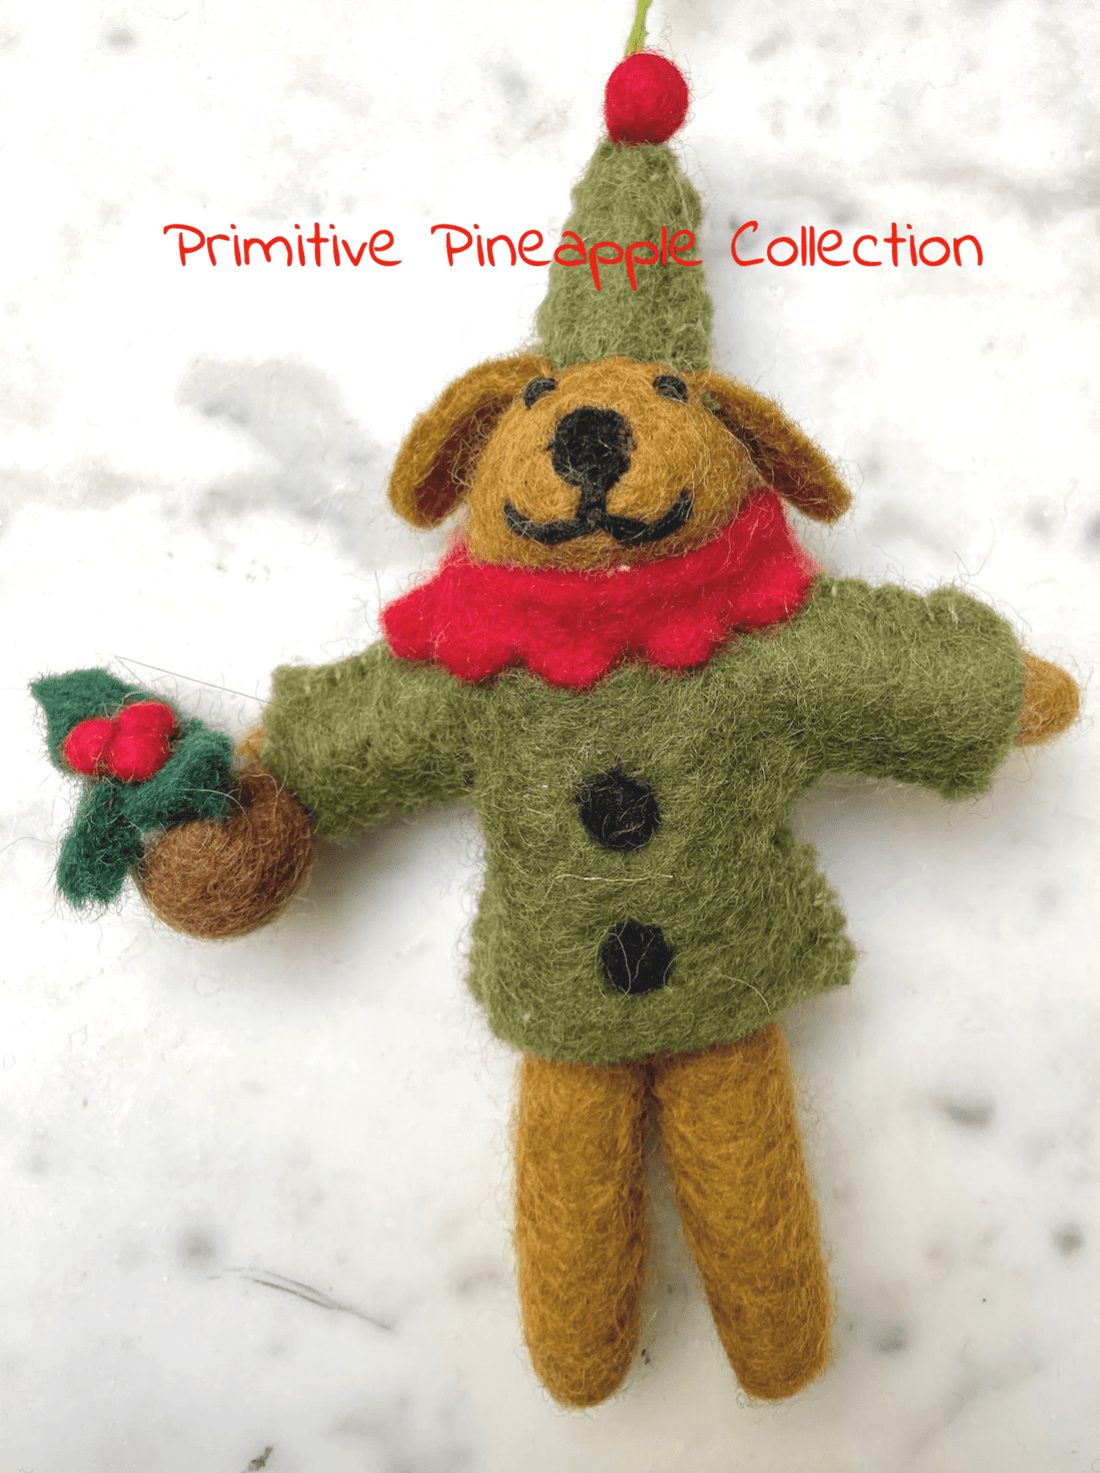 Primitive Handcrafted Wool Felt Christmas Dog w/ Holiday Pudding Ornament - The Primitive Pineapple Collection